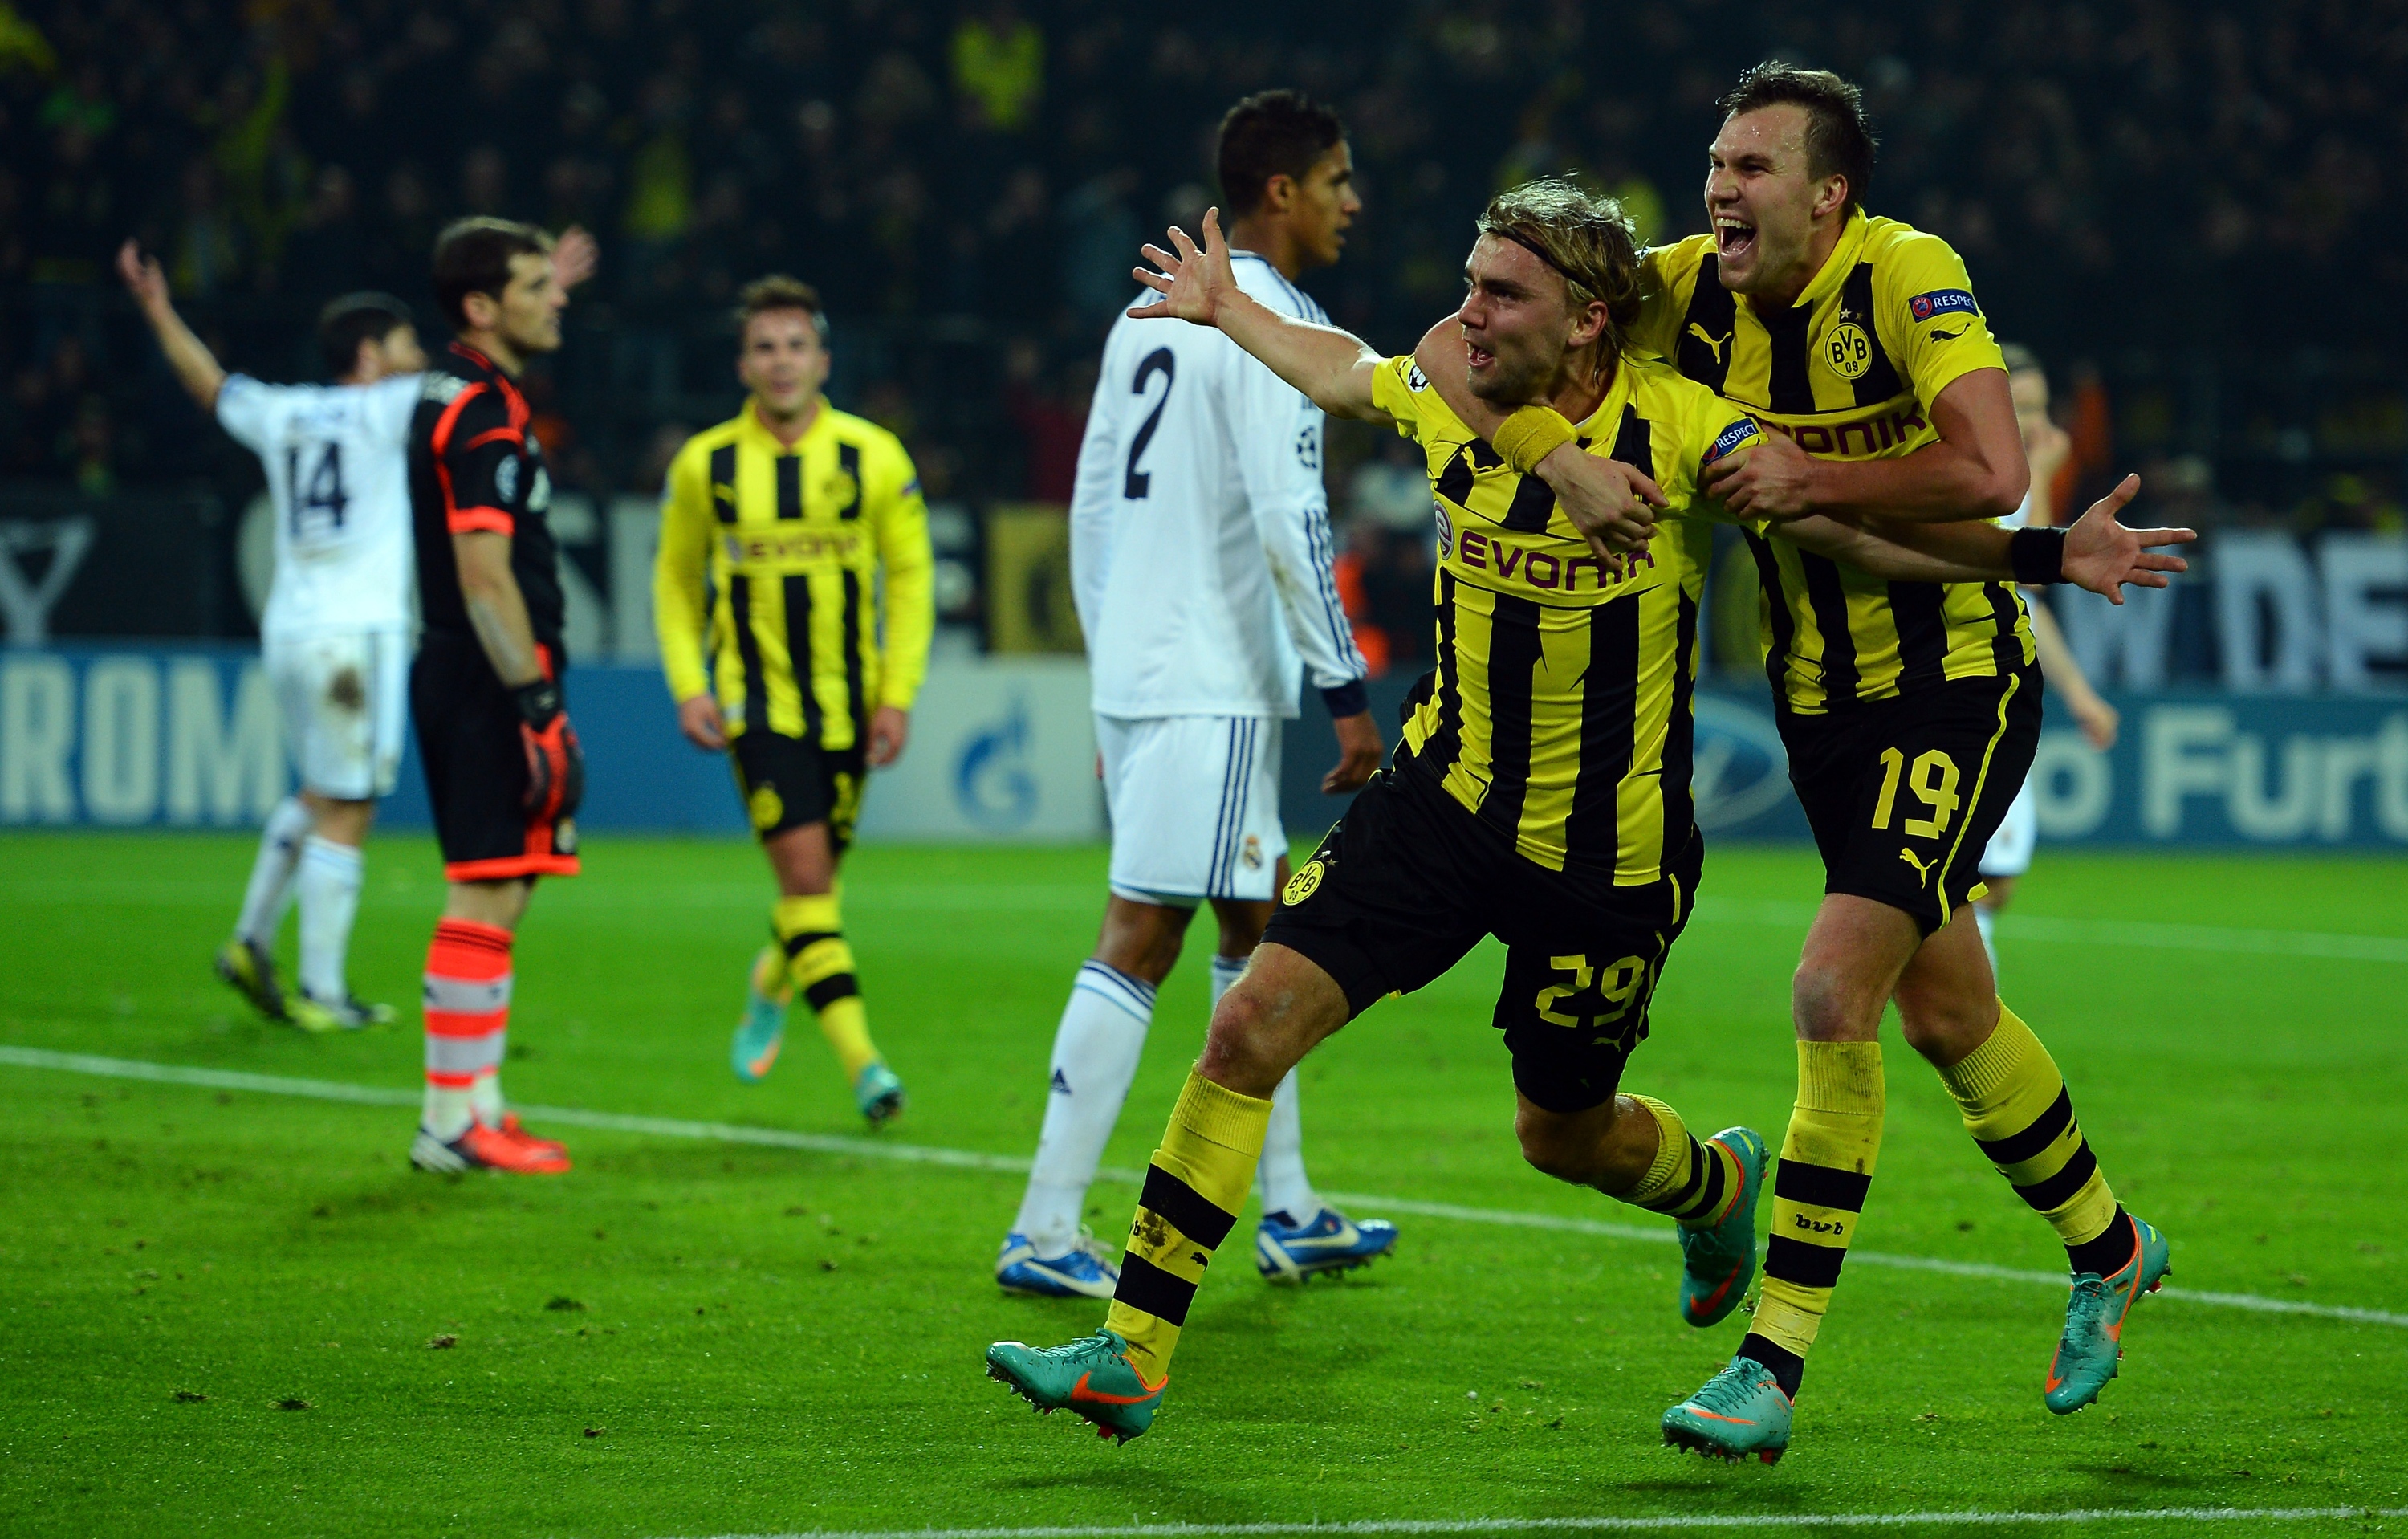 Can Dortmund hand Real their first defeat of this new season?